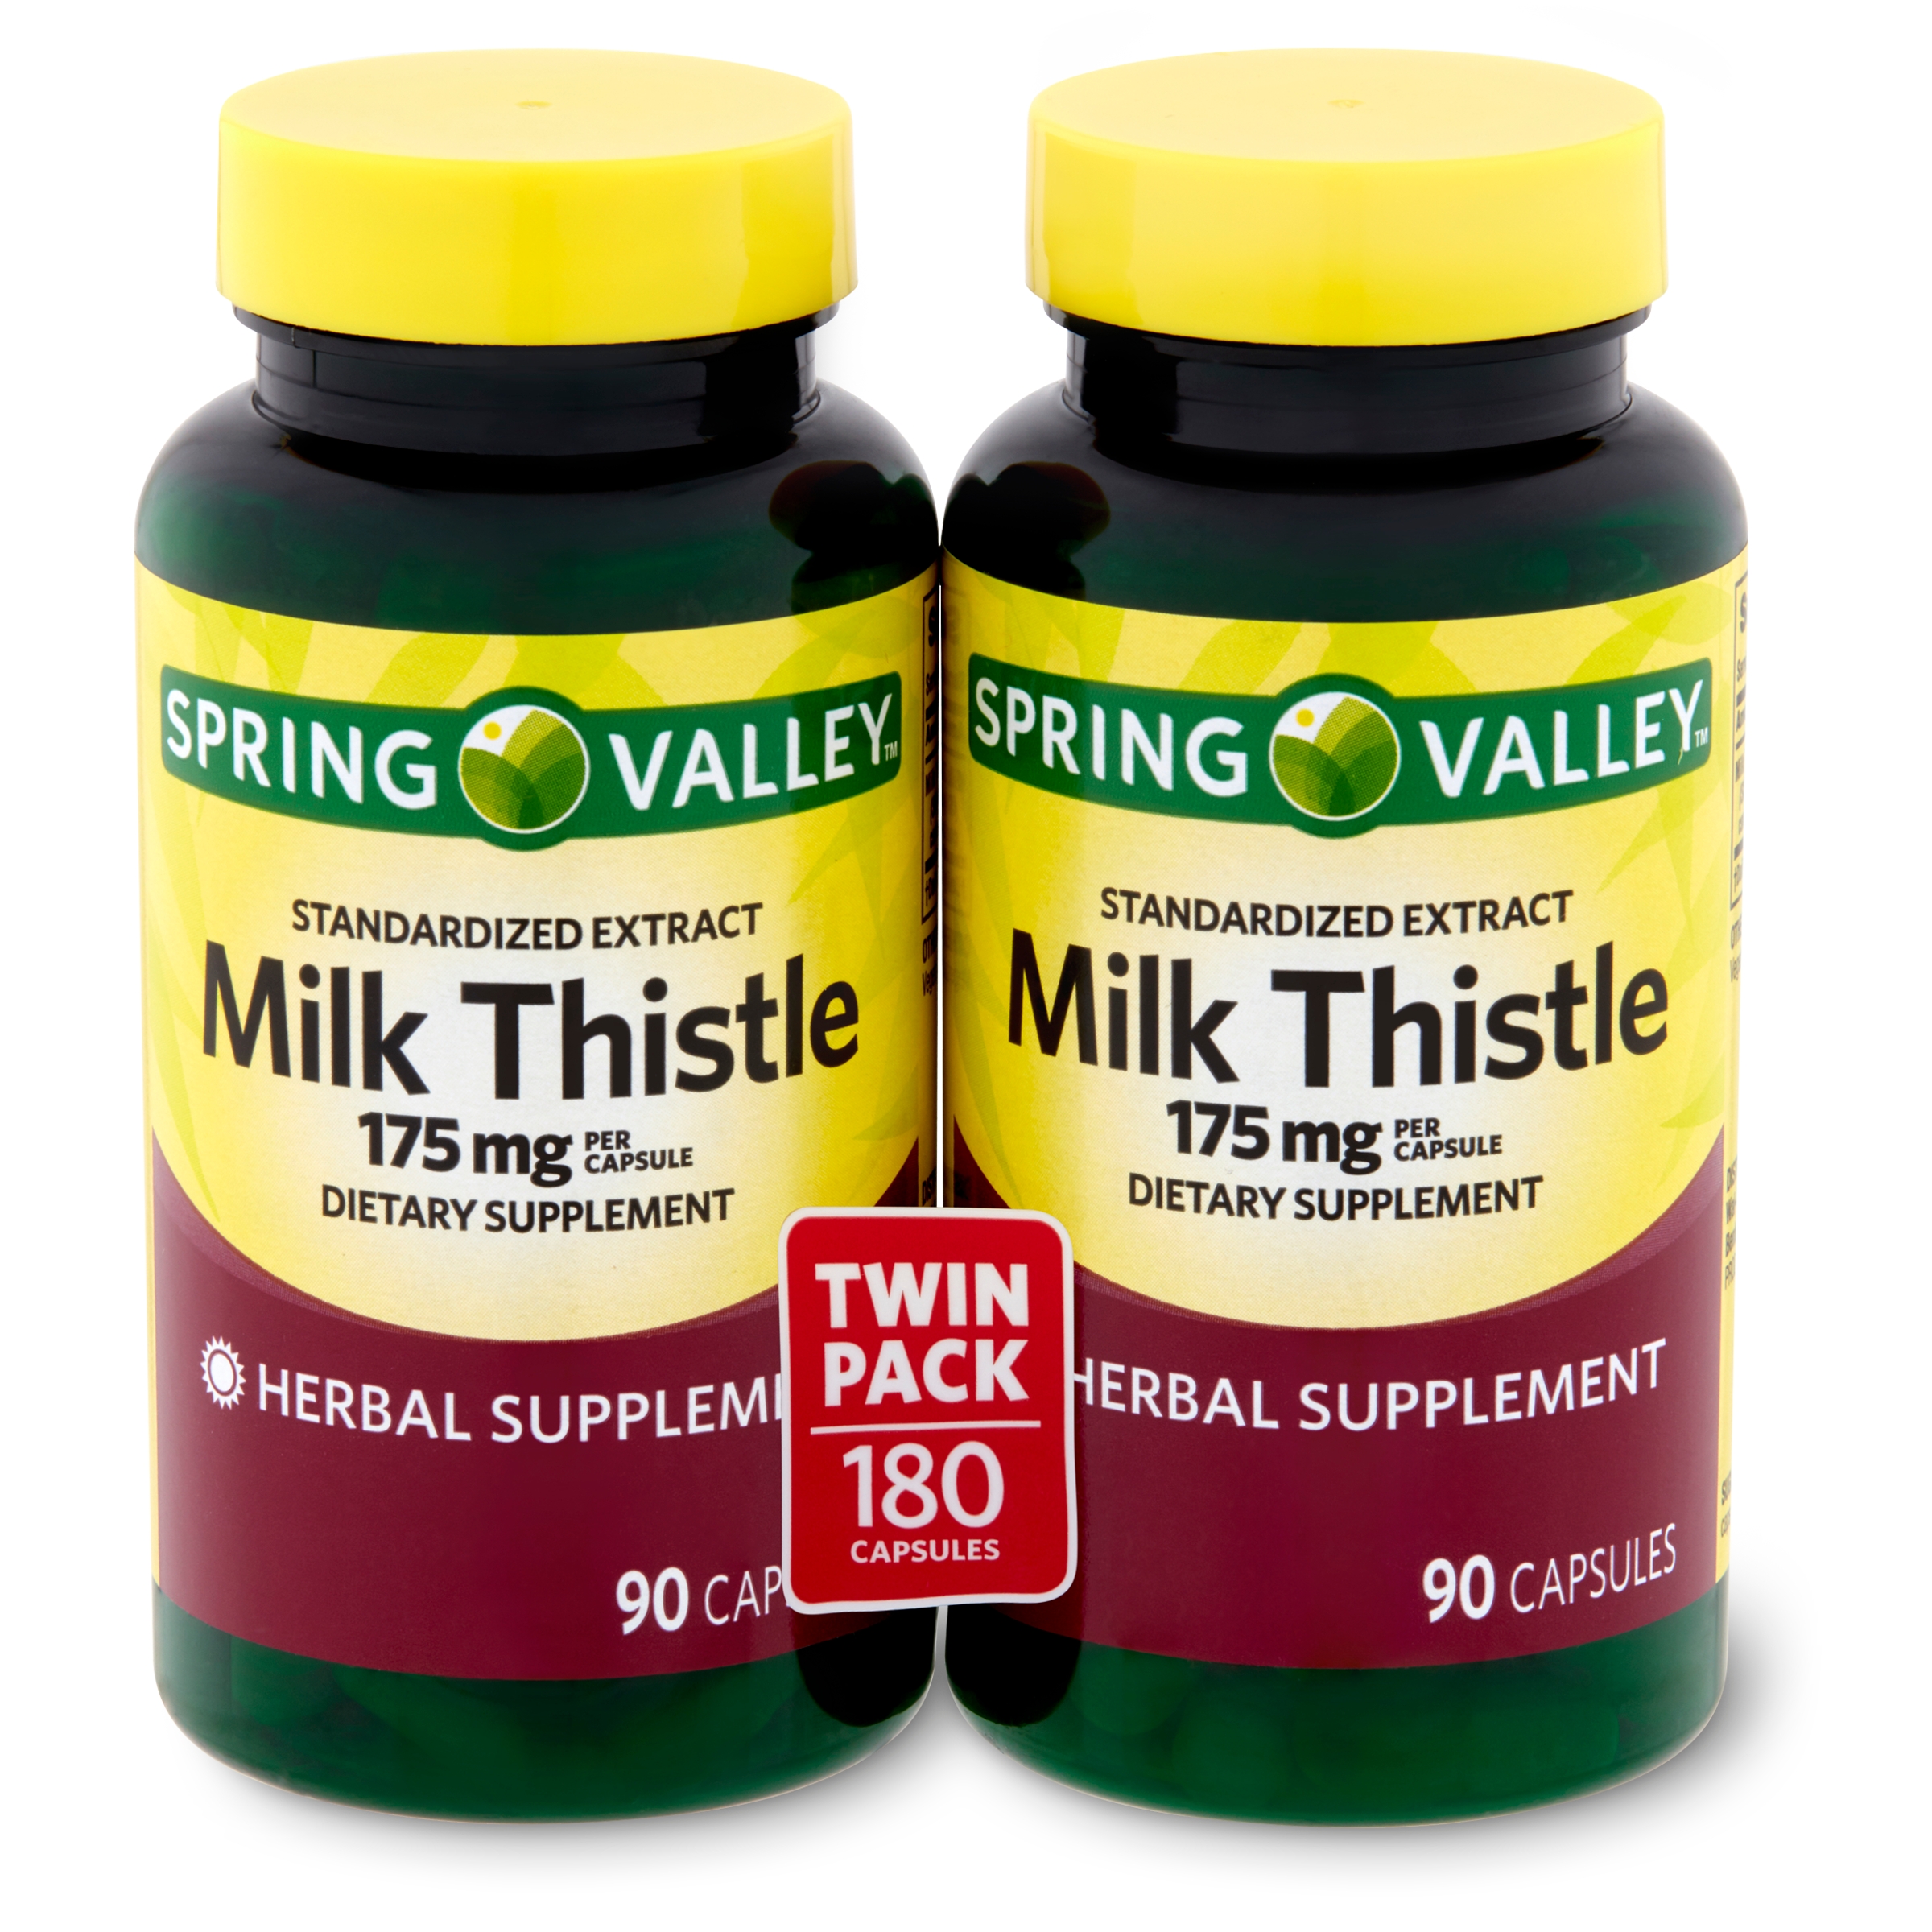 Spring Valley Standardized Extract Milk Thistle Dietary Supplement Capsules Twin Pack, 175 mg, 1180 Count - image 1 of 8